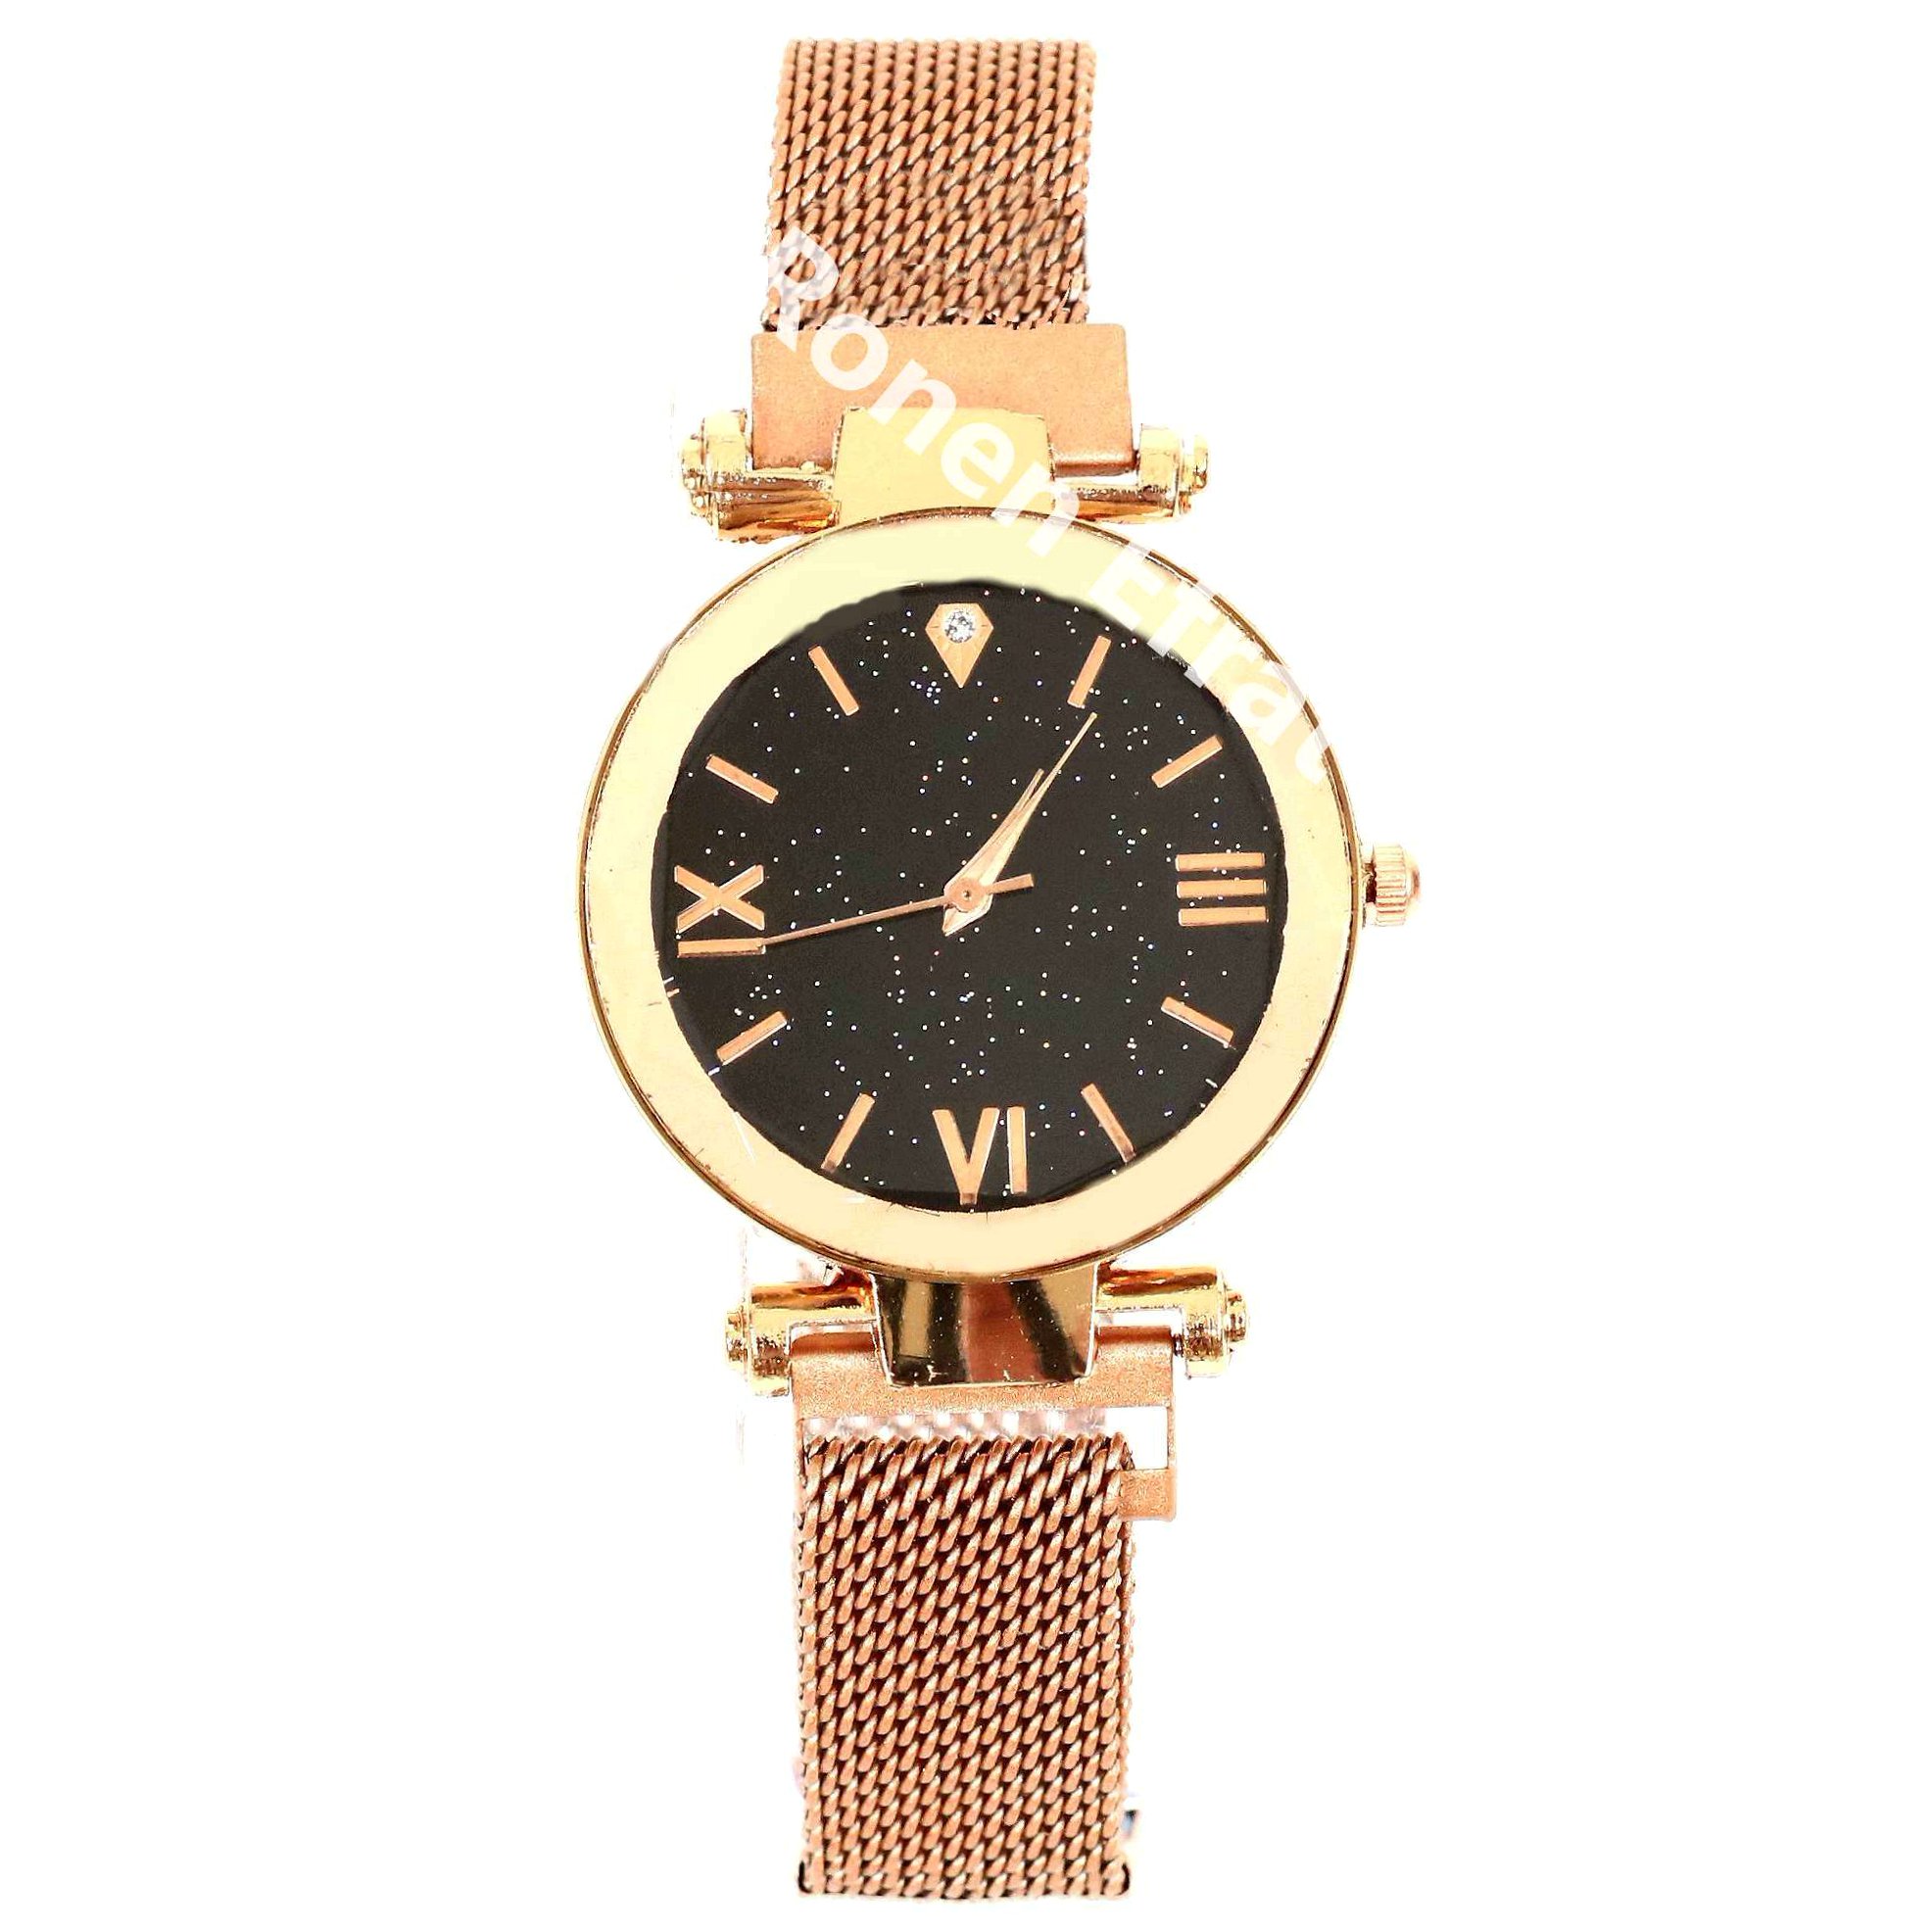 A stunning jewel watch in rose gold color with a fashionable look